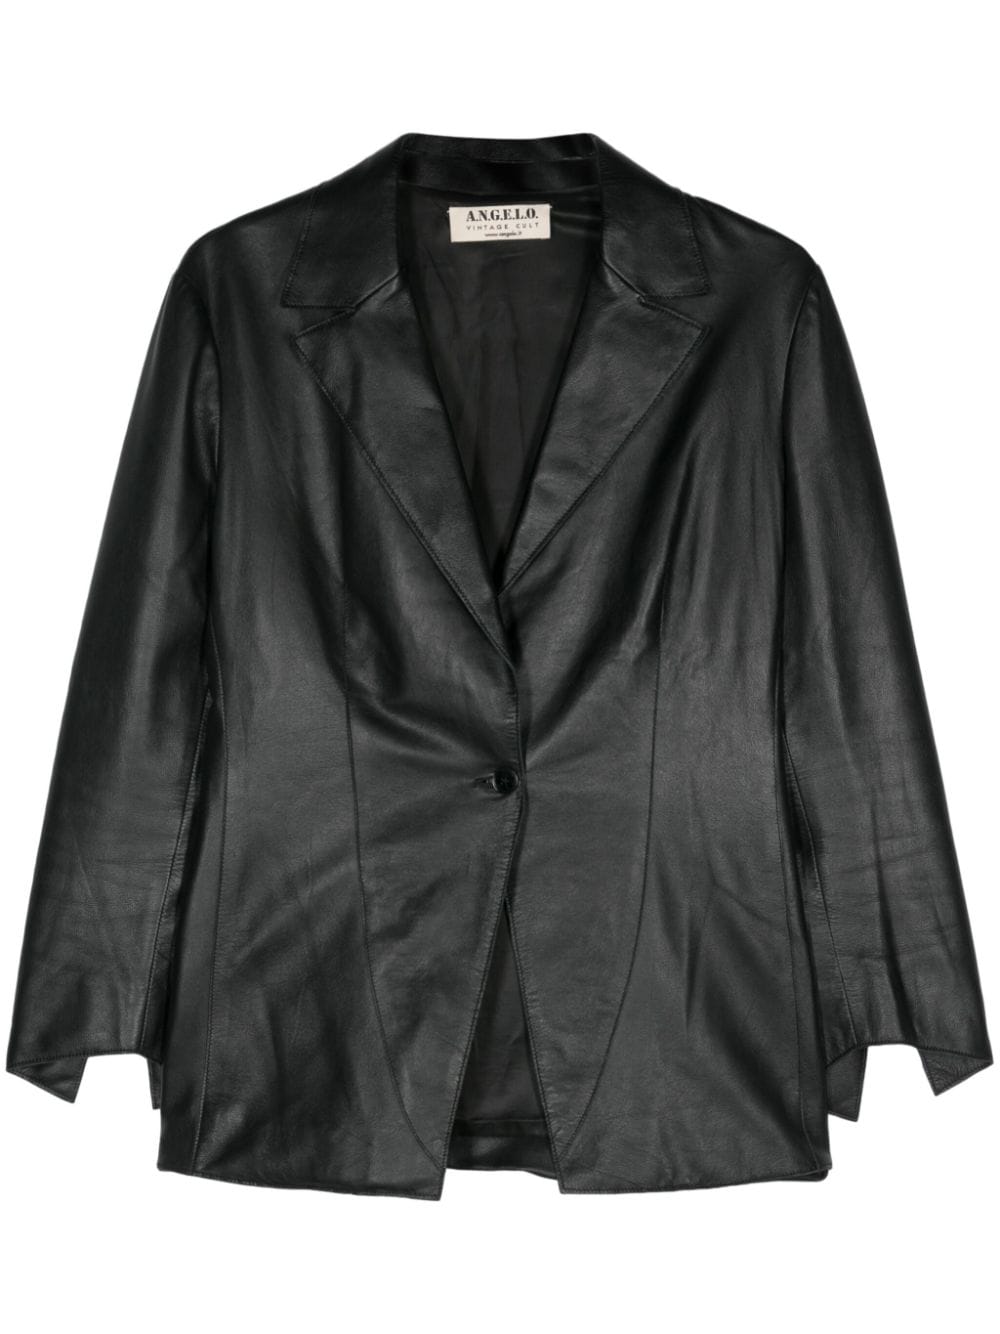 2000s leather single-breasted blazer